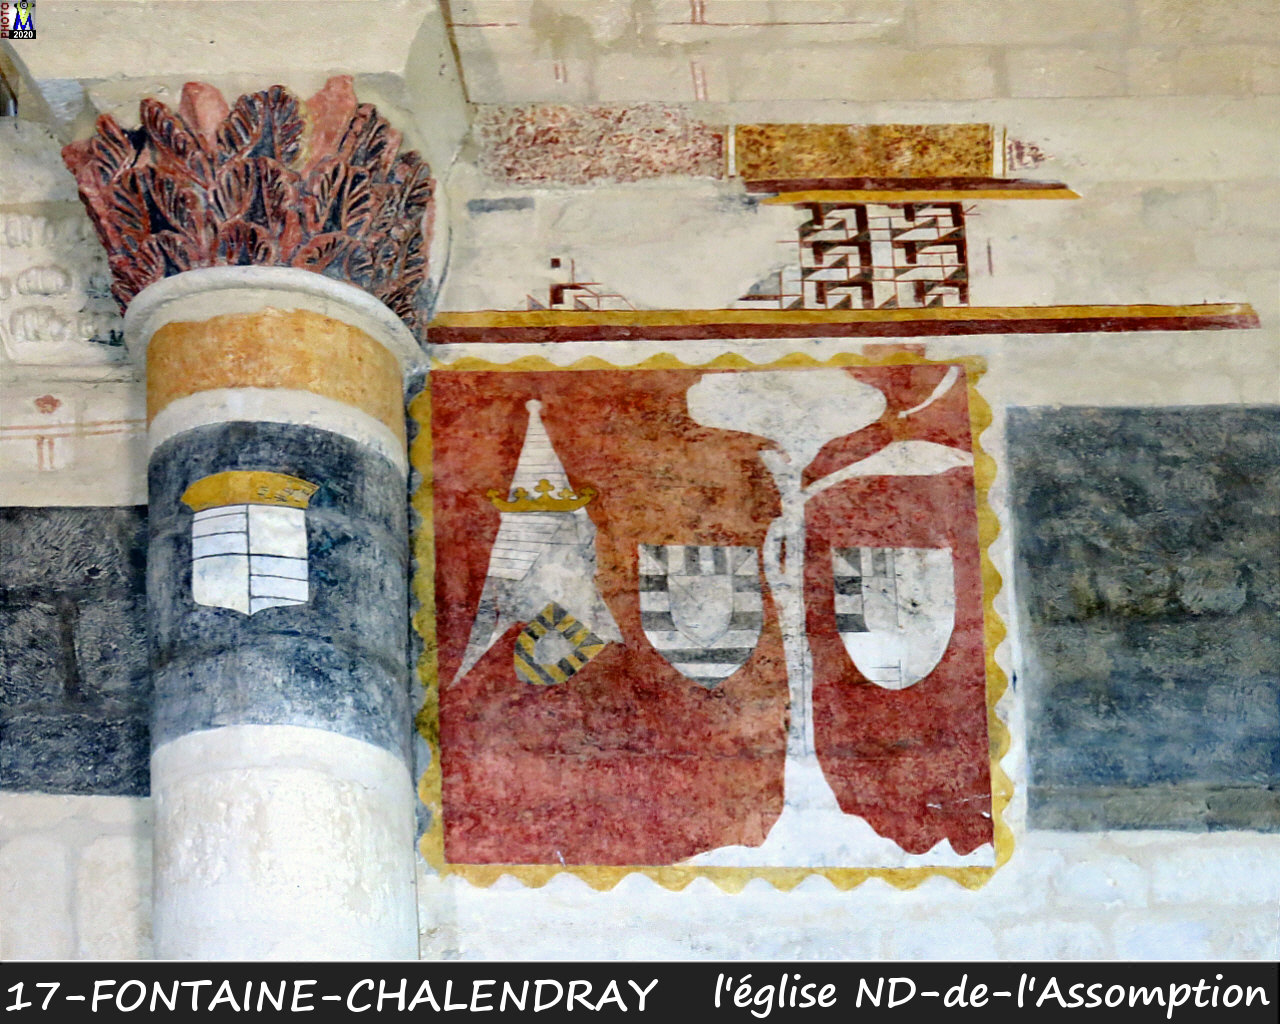 17FONTAINE-CHALENDRAY_eglise_1132.jpg